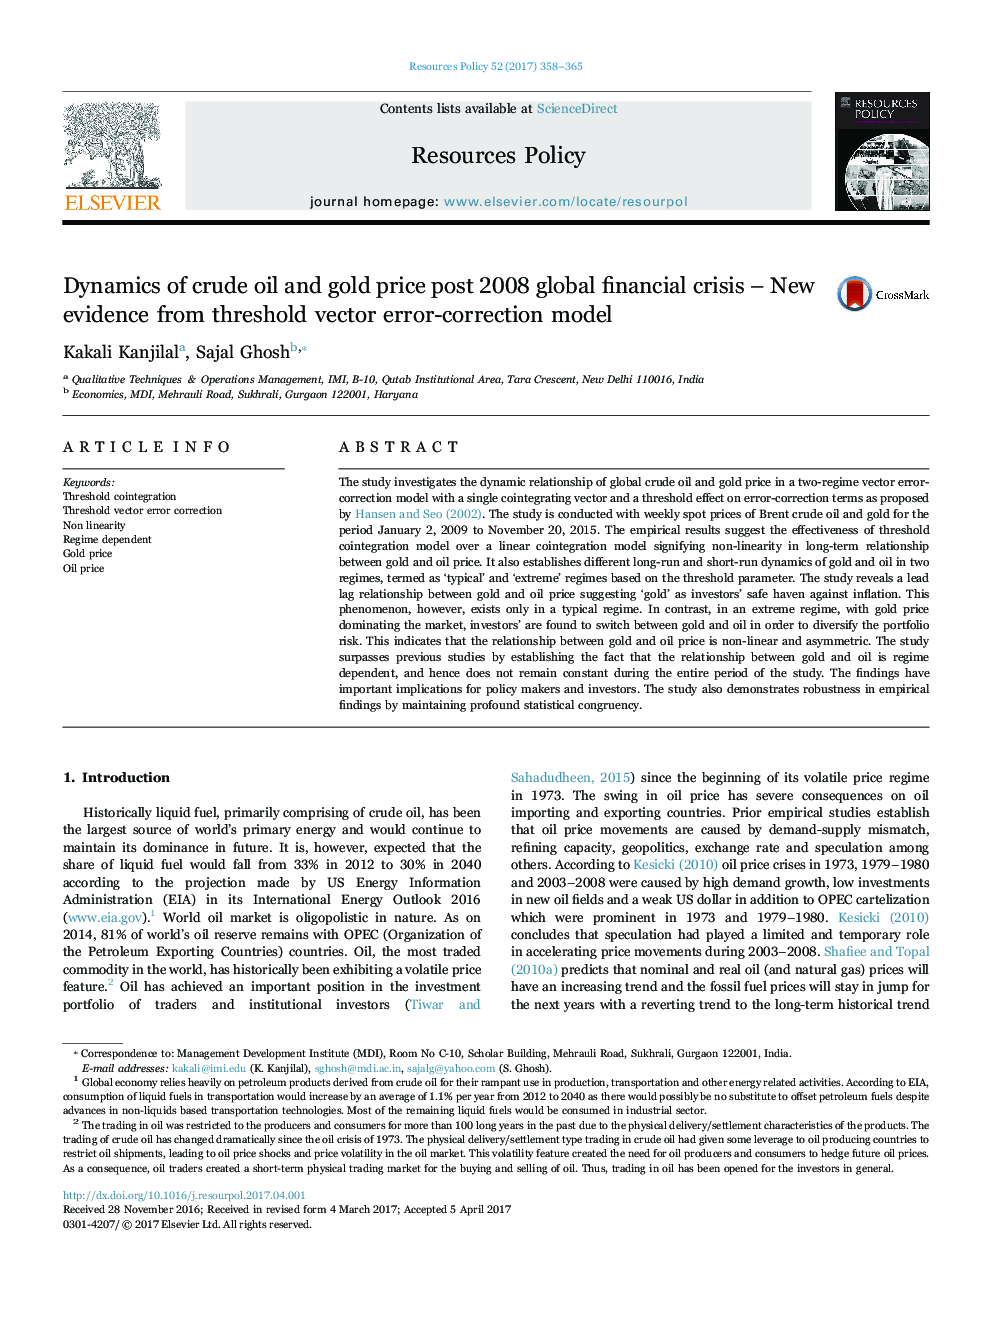 Dynamics of crude oil and gold price post 2008 global financial crisis - New evidence from threshold vector error-correction model